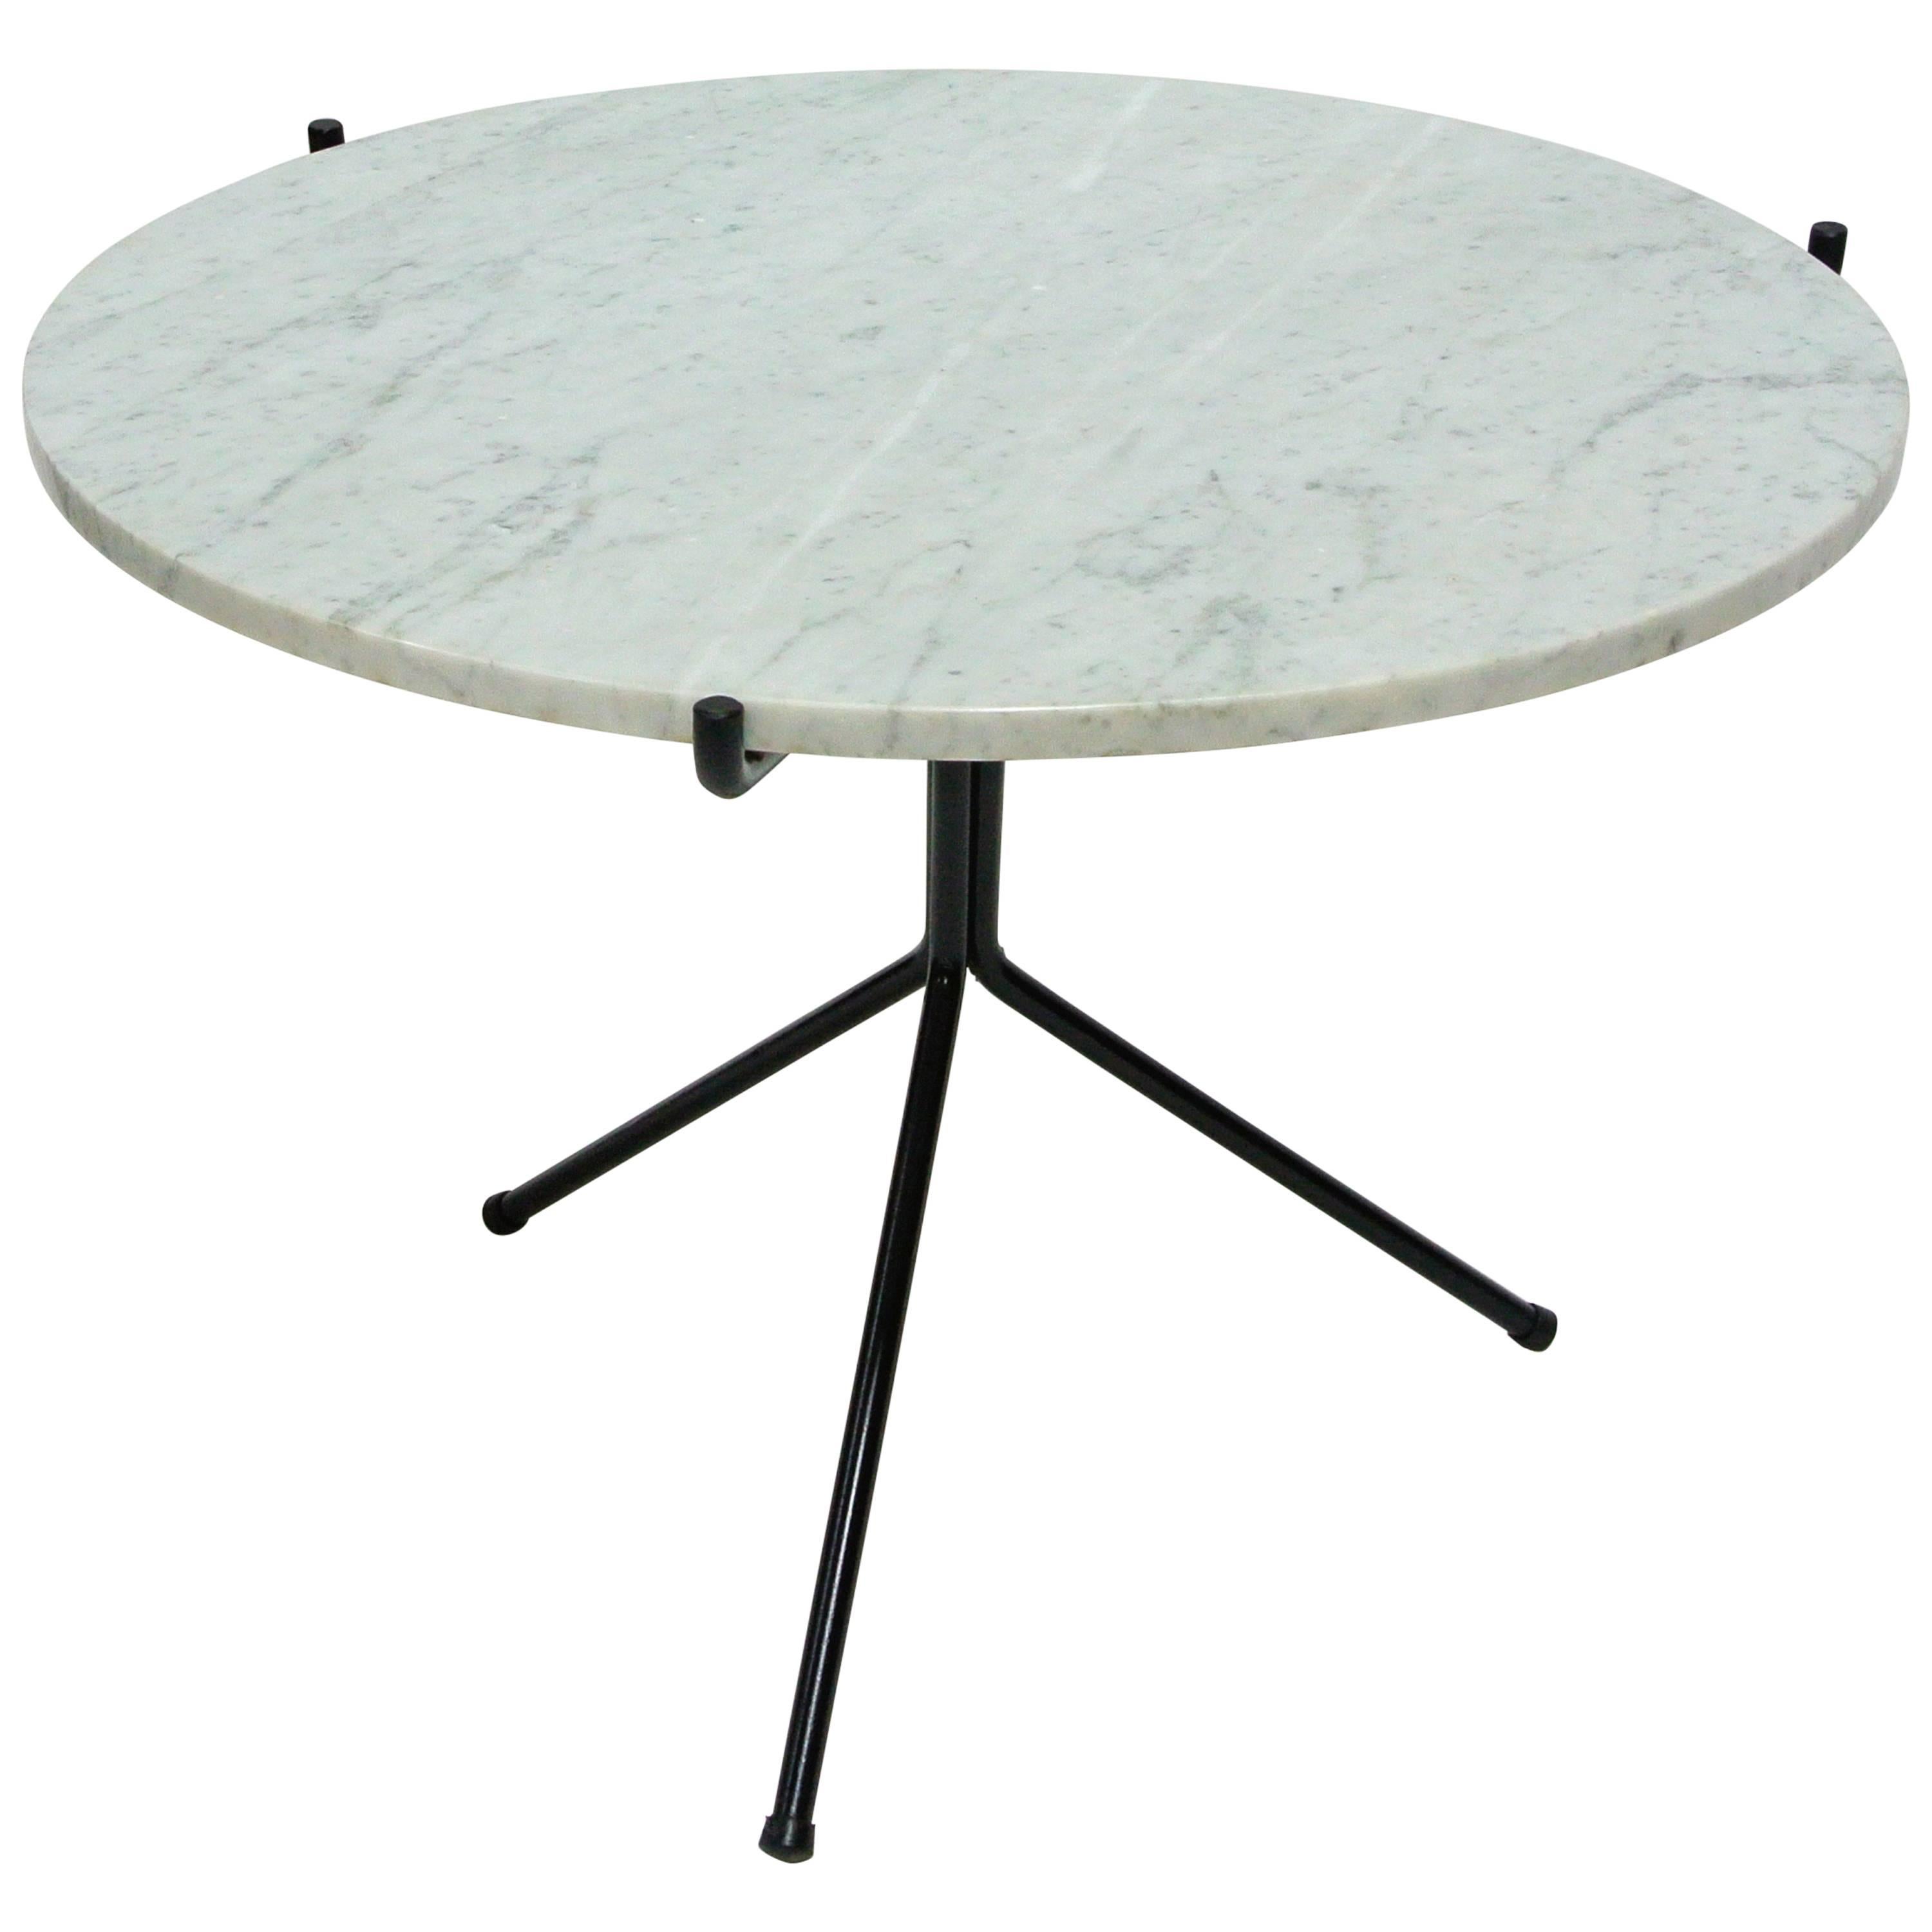 Rare and elegant marble and iron tripod table designed by Norman Cherner for Konwiser, circa 1950s.